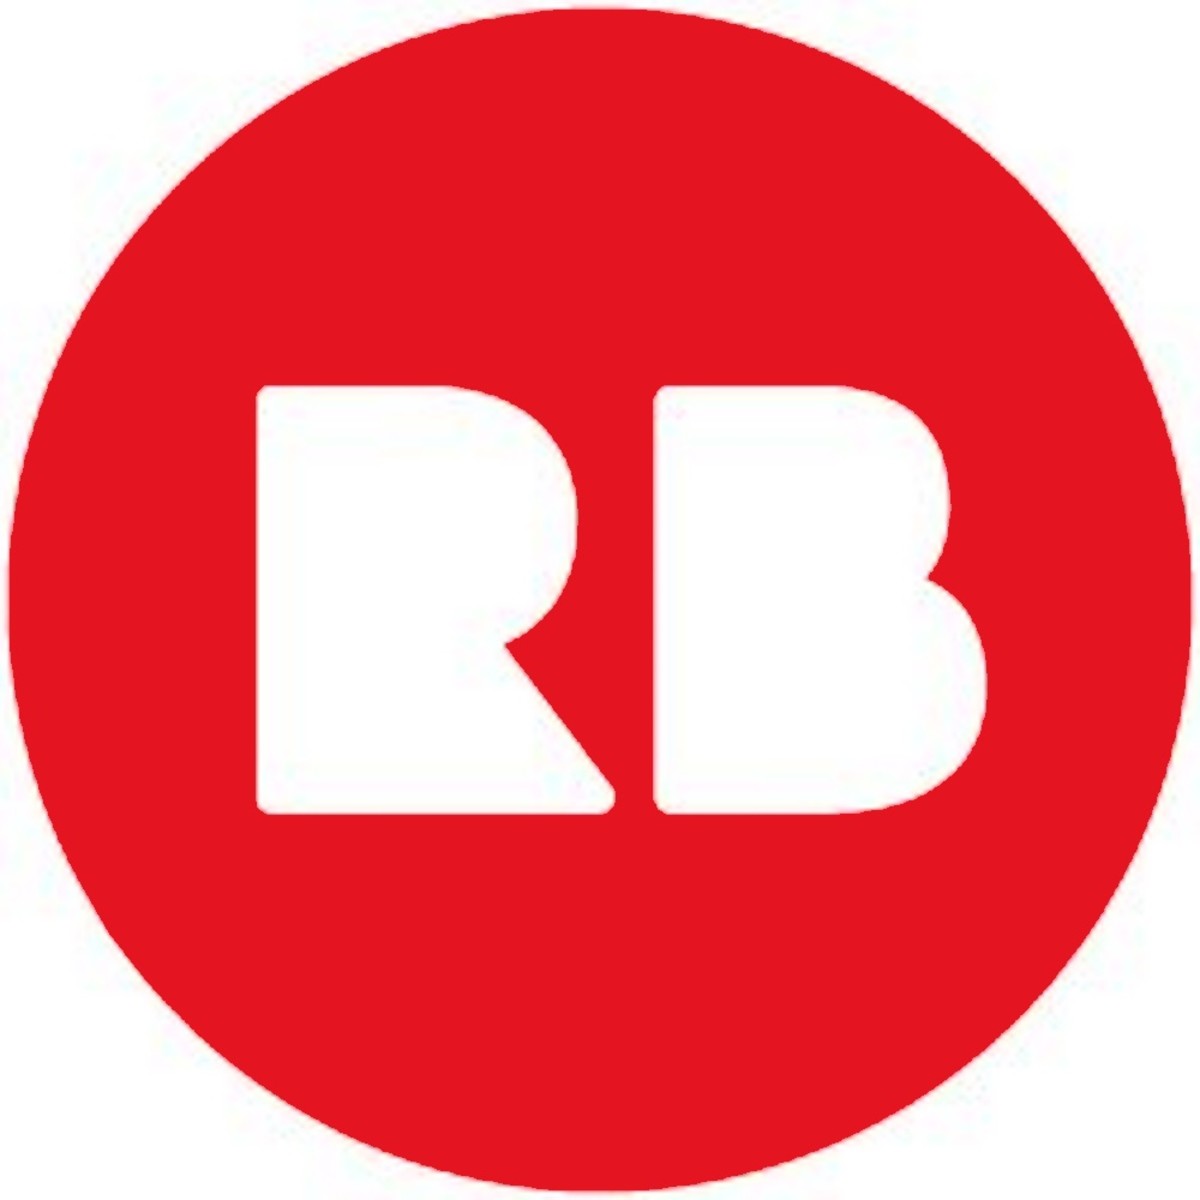 How To Change Username On Redbubble